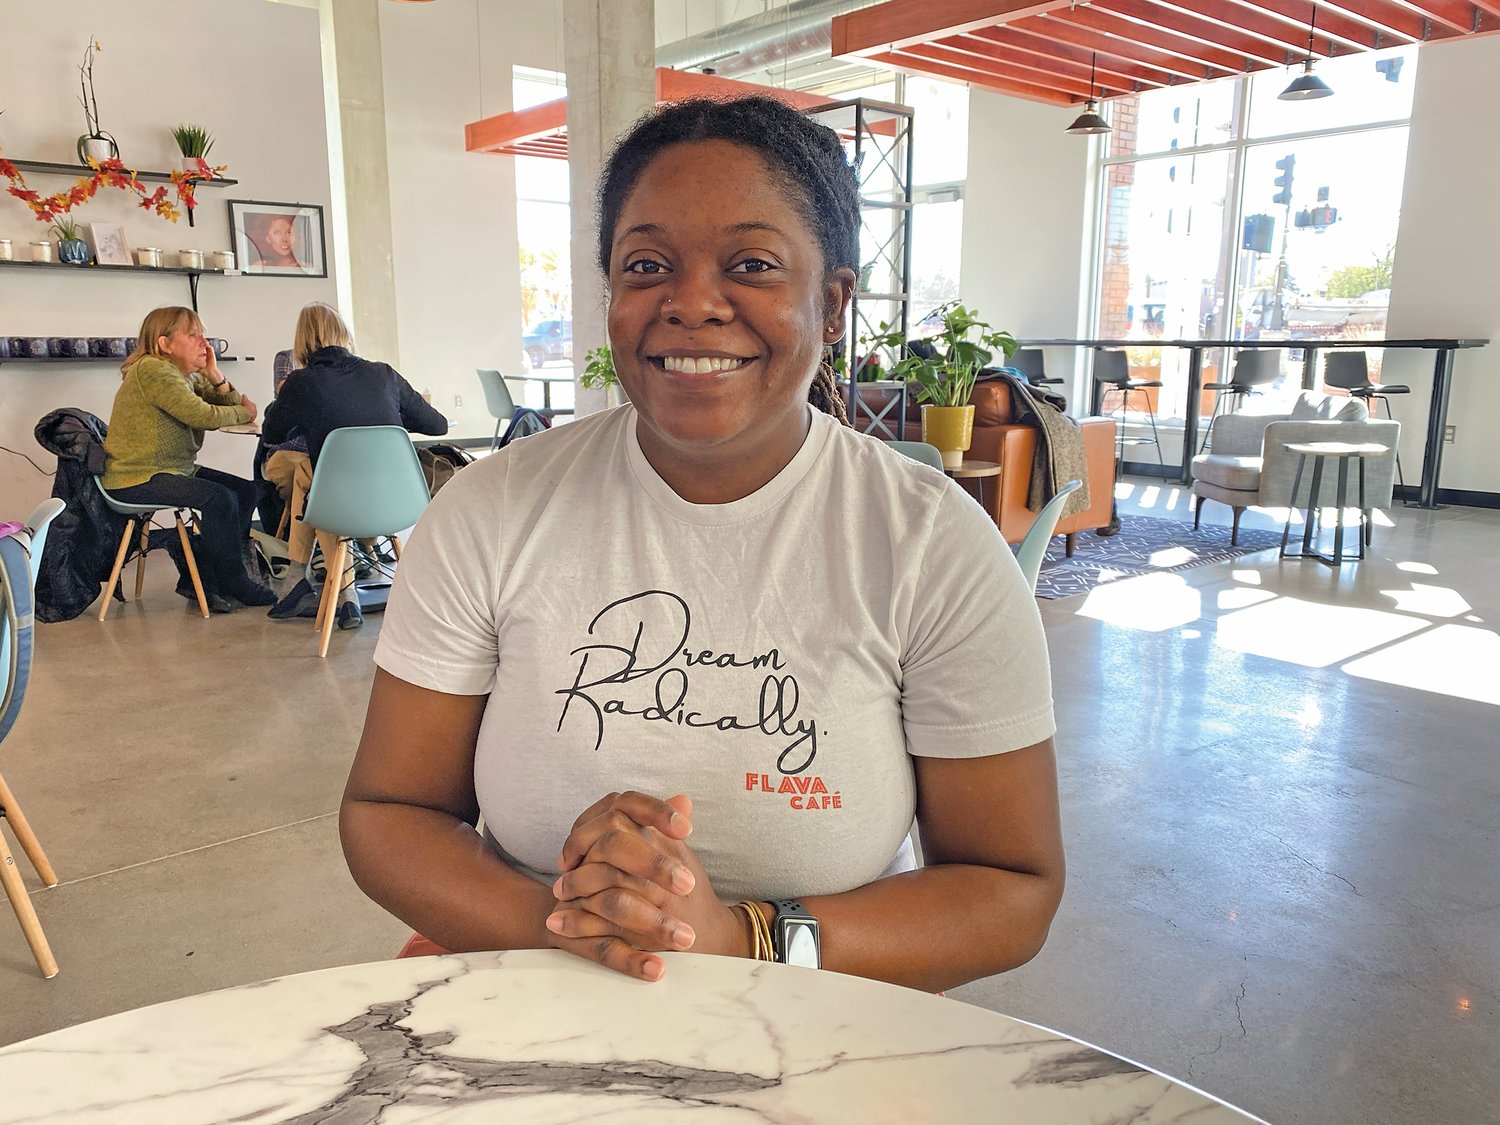 Shaunie Grisby hopes to create a place like The Den from the television series “Moesha”– a place that is a community hangout. Flava Coffee and Cafe at 623 University Ave. West serves beverages, breakfast and lunch. “I wanted to create a space like that where people loved being,” said Grisby. (Photo by Tesha M. Christensen)